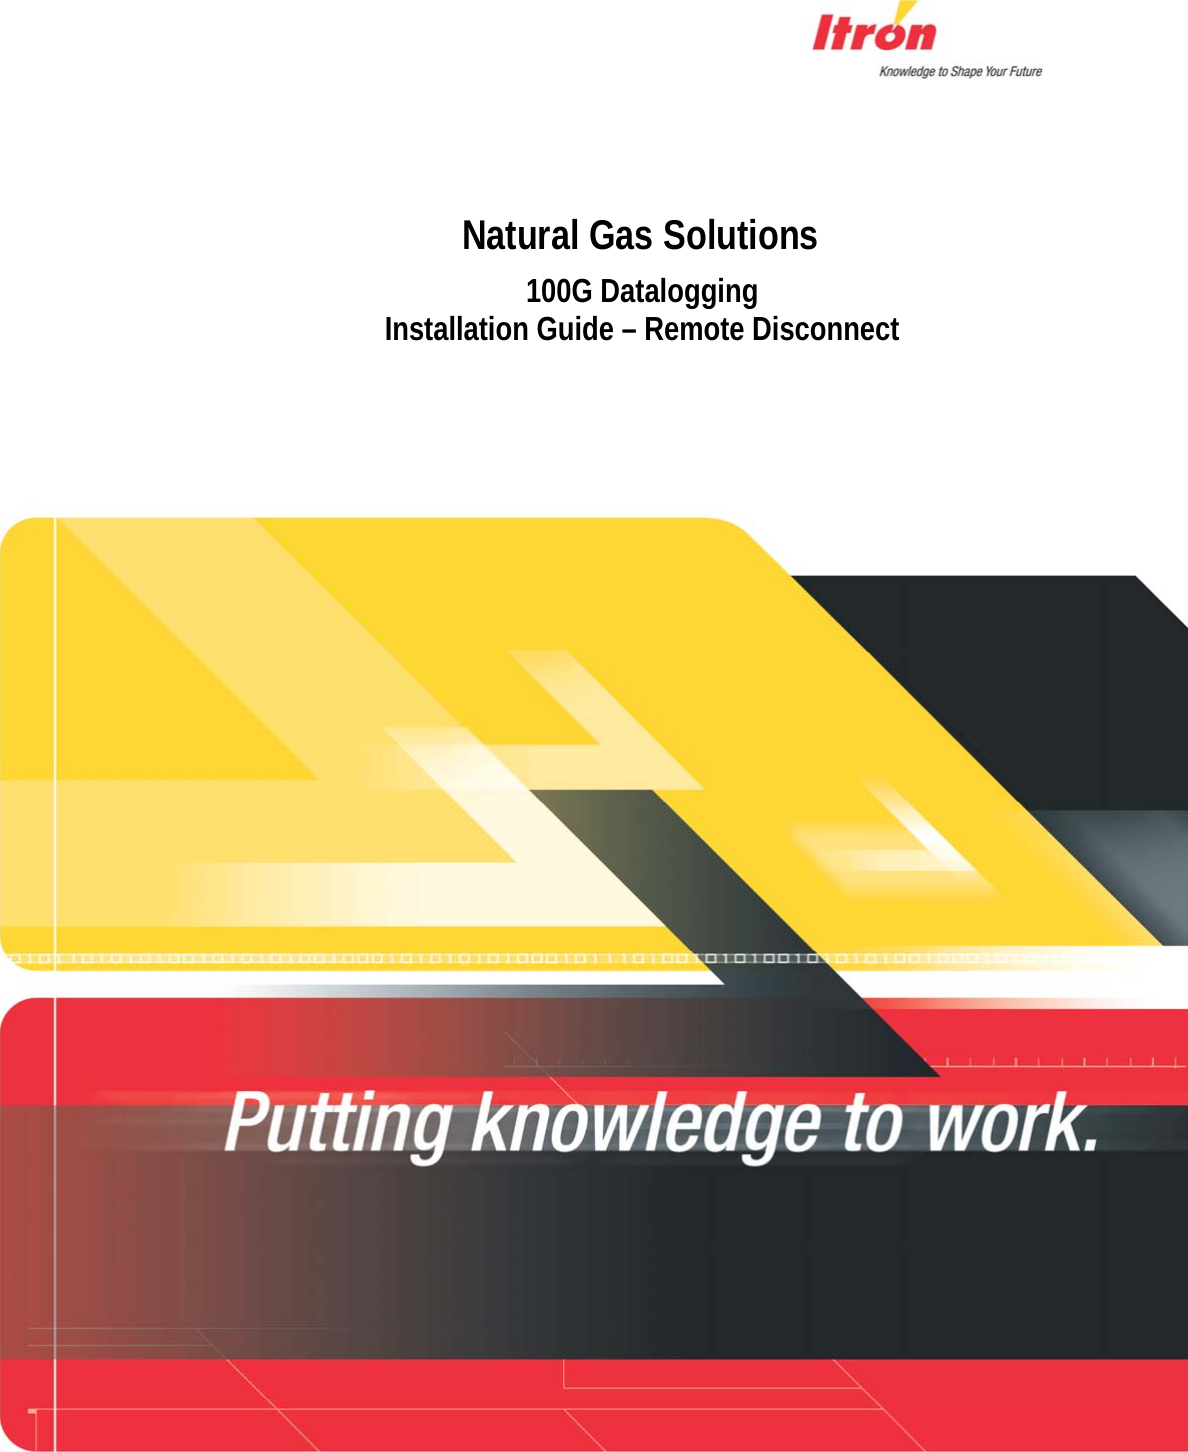    Natural Gas Solutions 100G Datalogging  Installation Guide – Remote Disconnect     